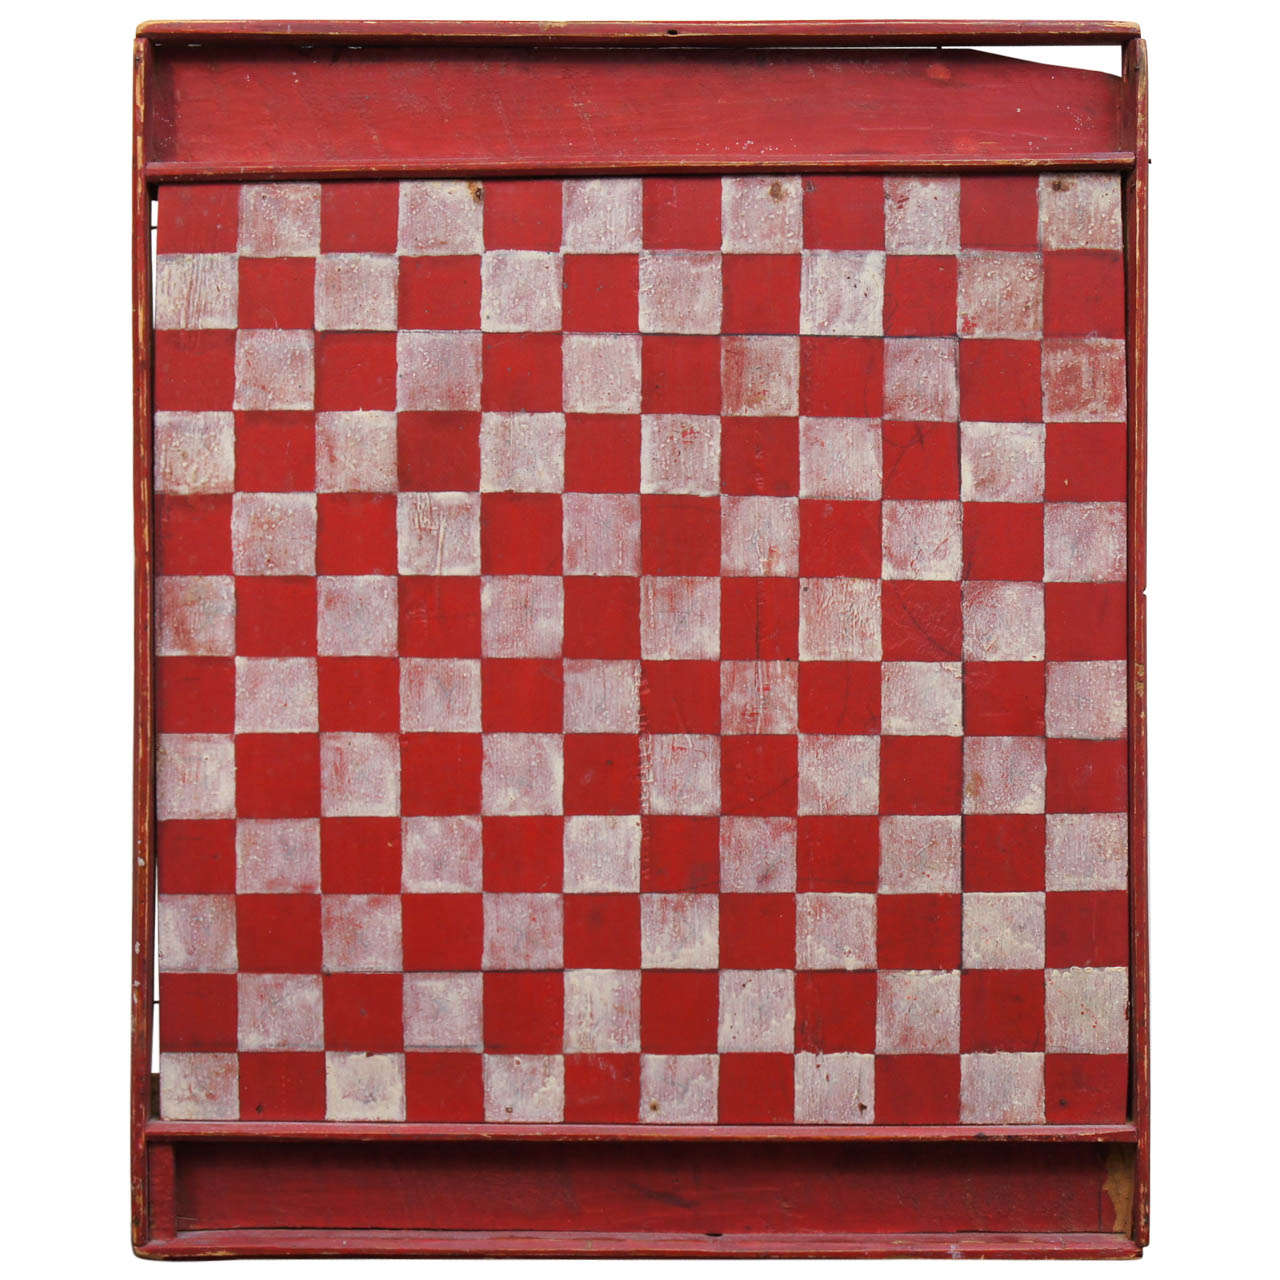 Canadian Draughts Gameboard